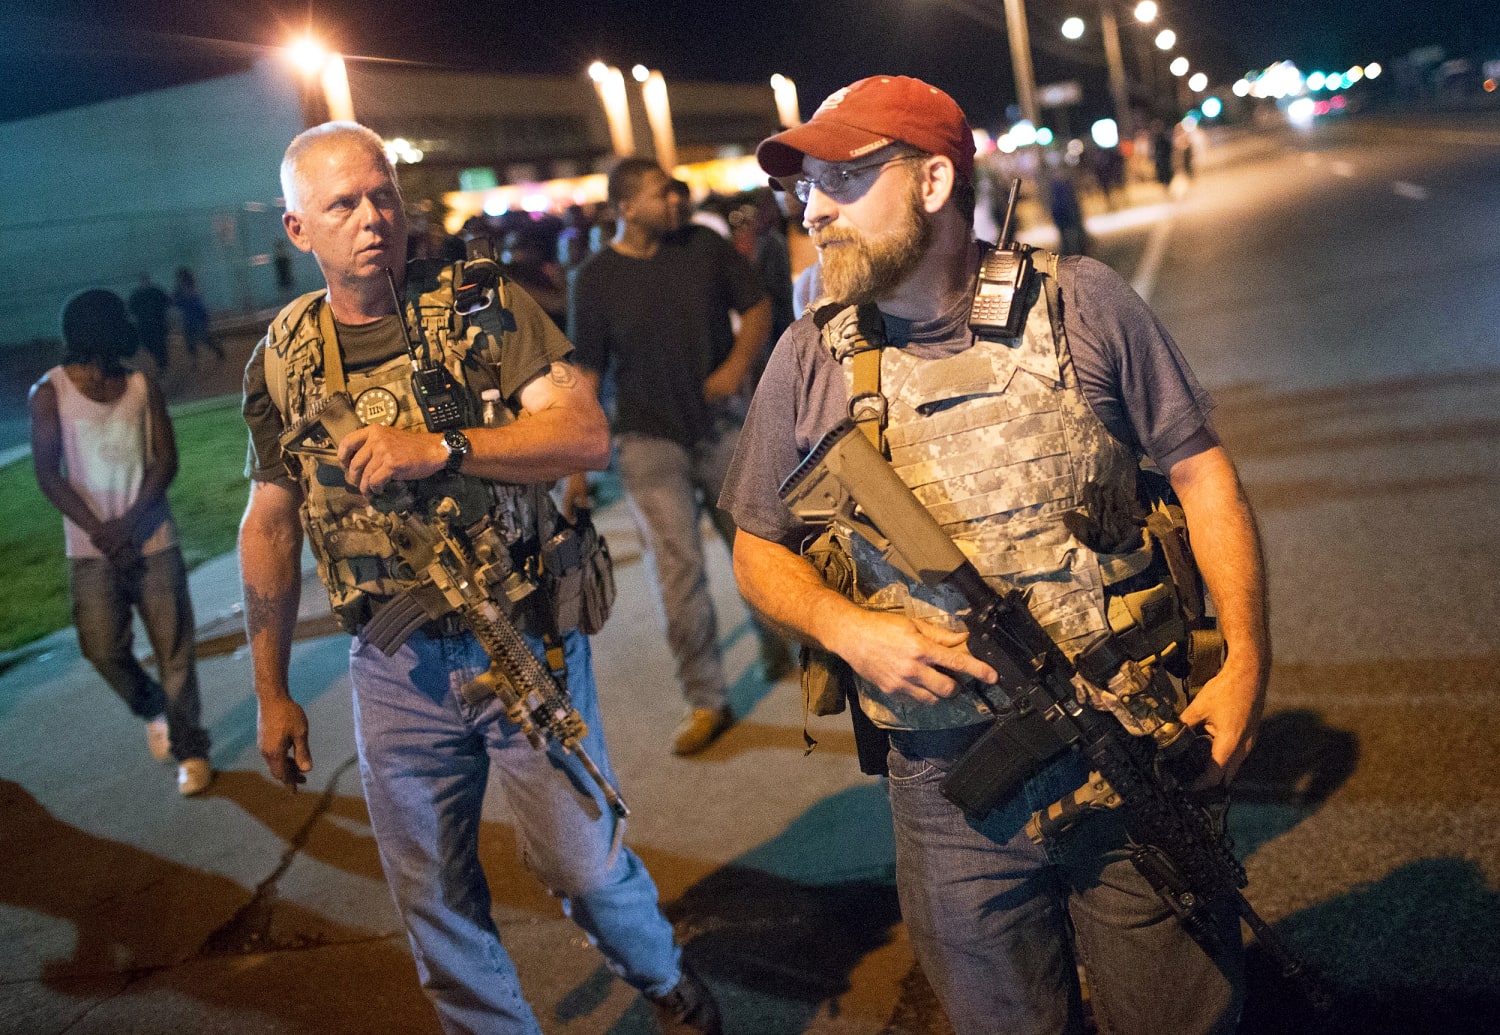 protesters go, armed militias, vigilantes to with little to stop them